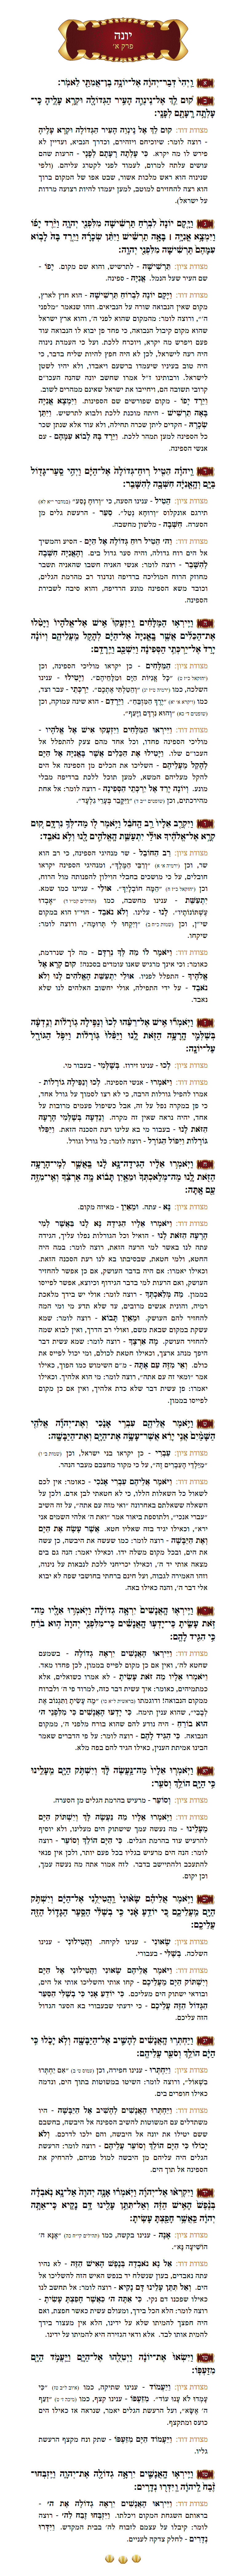 Sefer Yonah Chapter 1 with commentary